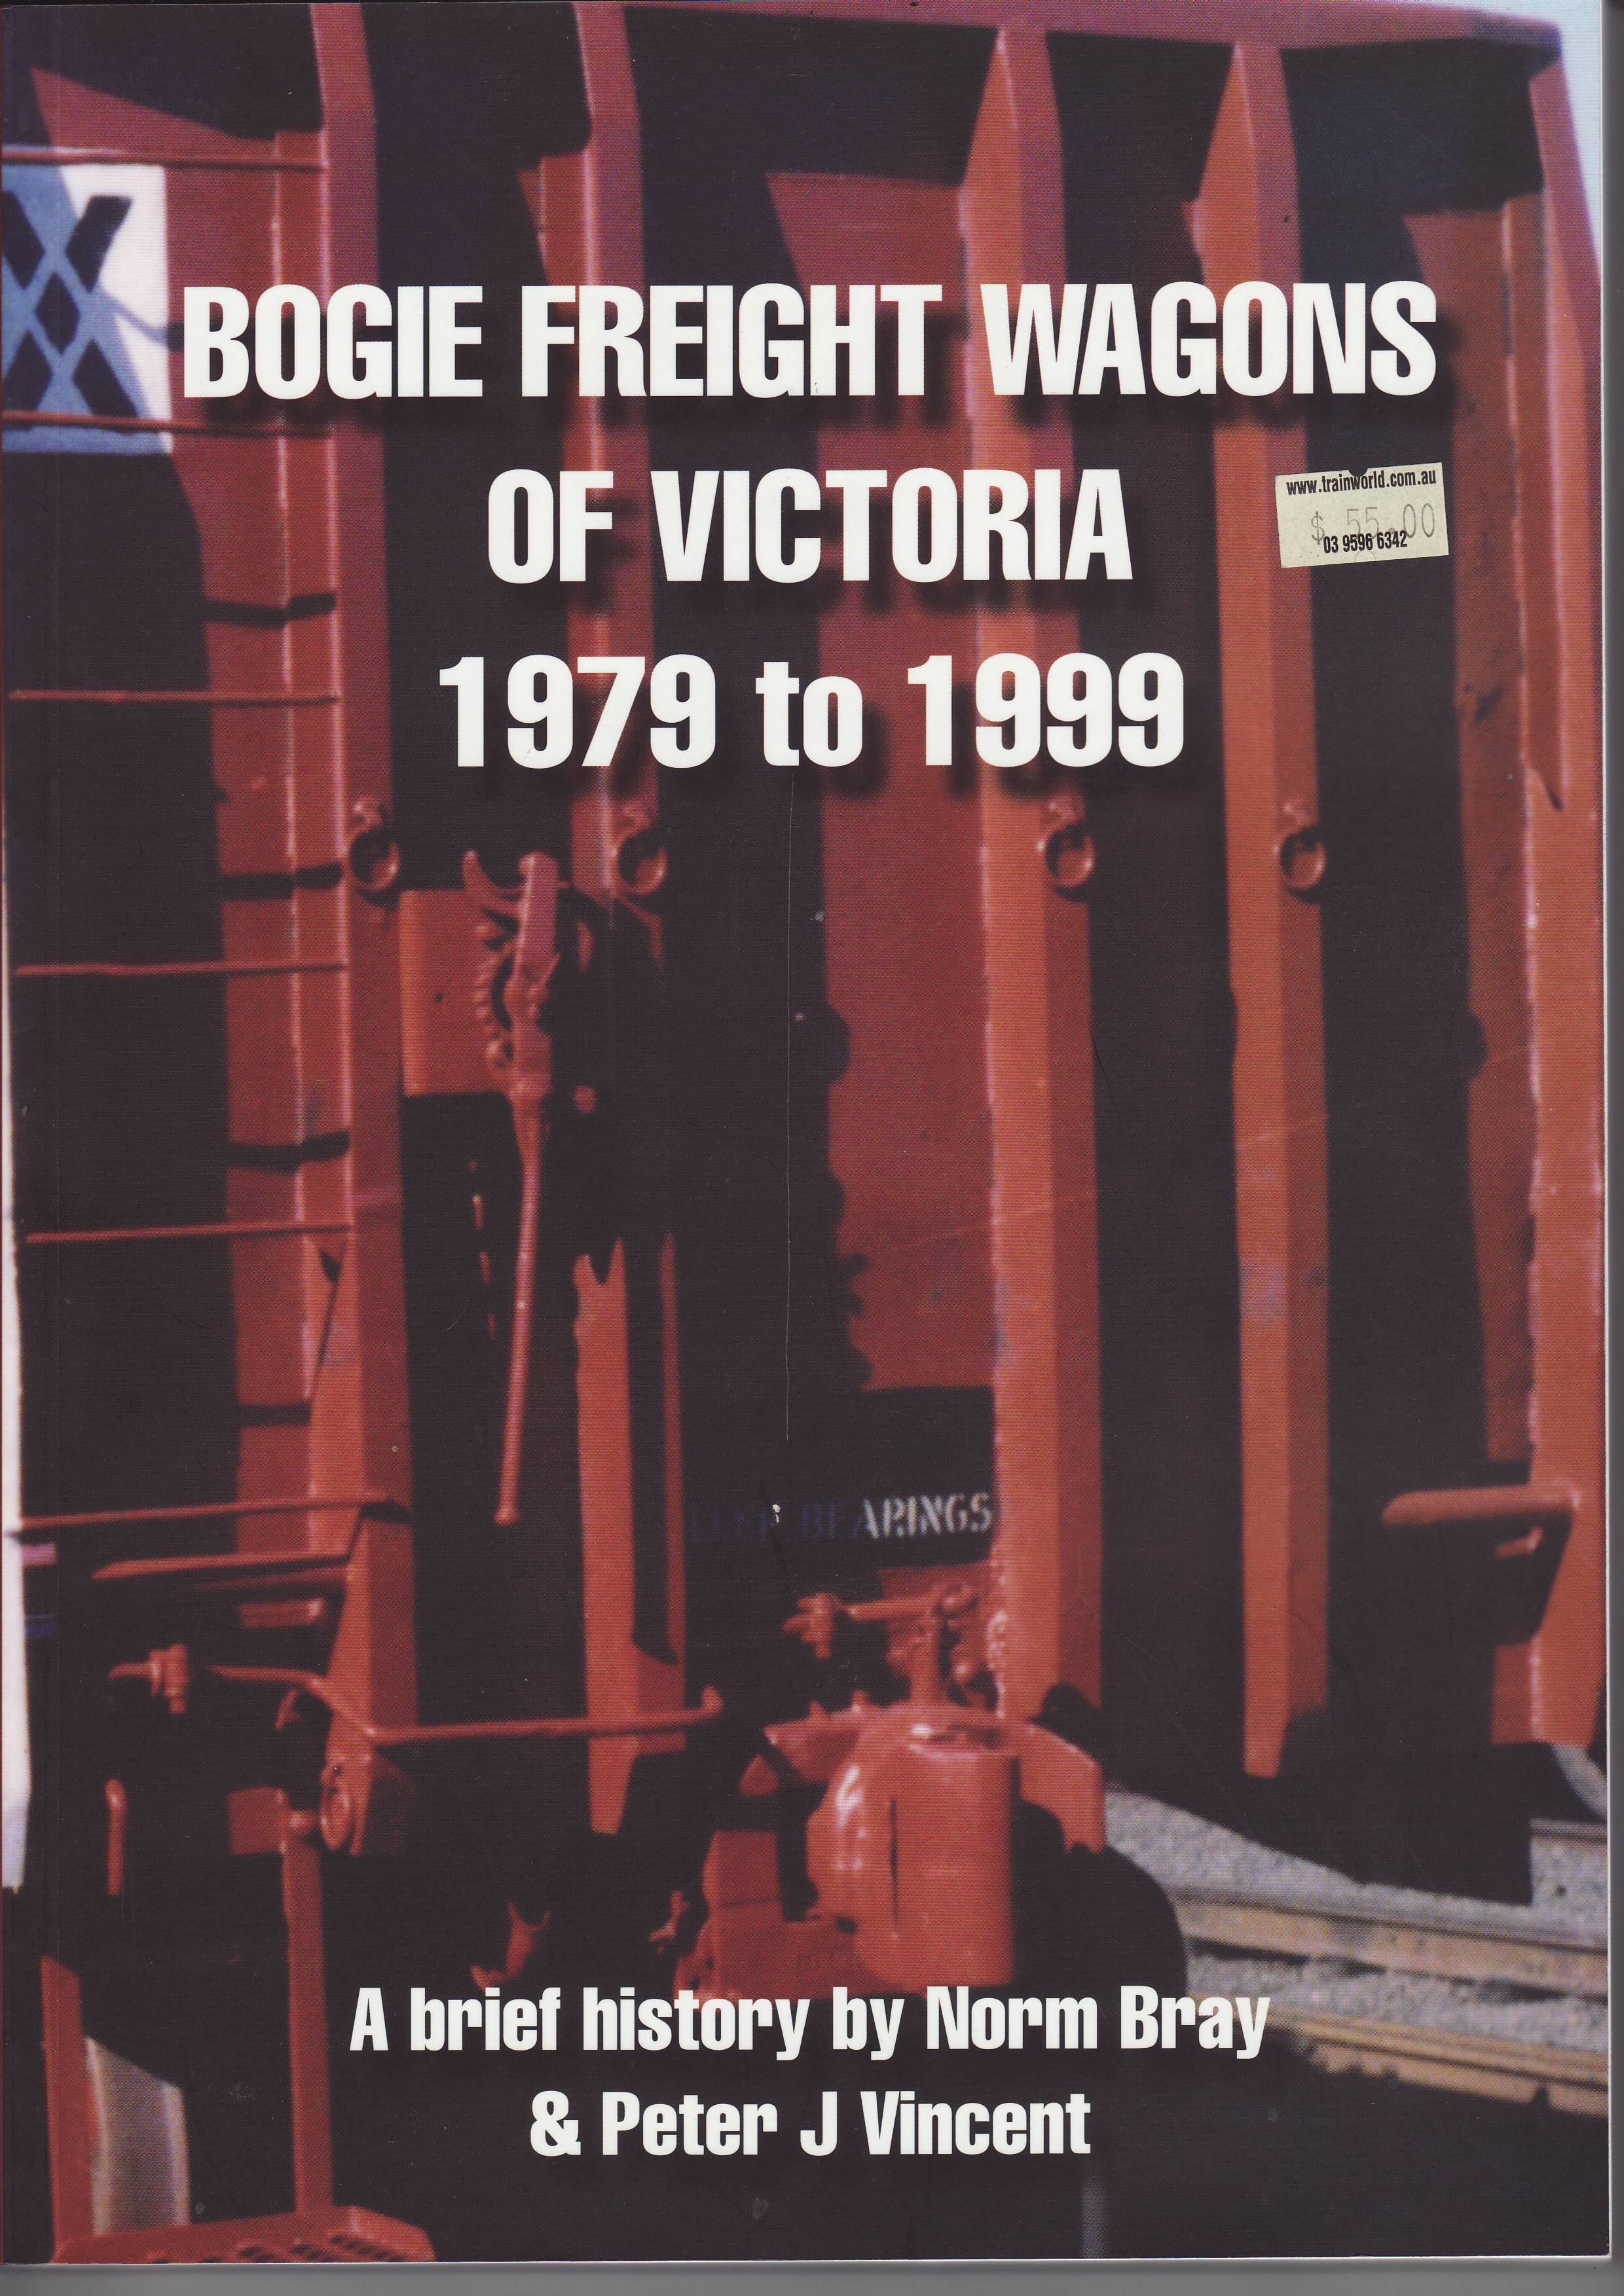 A Brief History of: Bogie Freight Wagons of Victoria 1979 to 1999 - Bray, Norm & Vincent, Peter J.